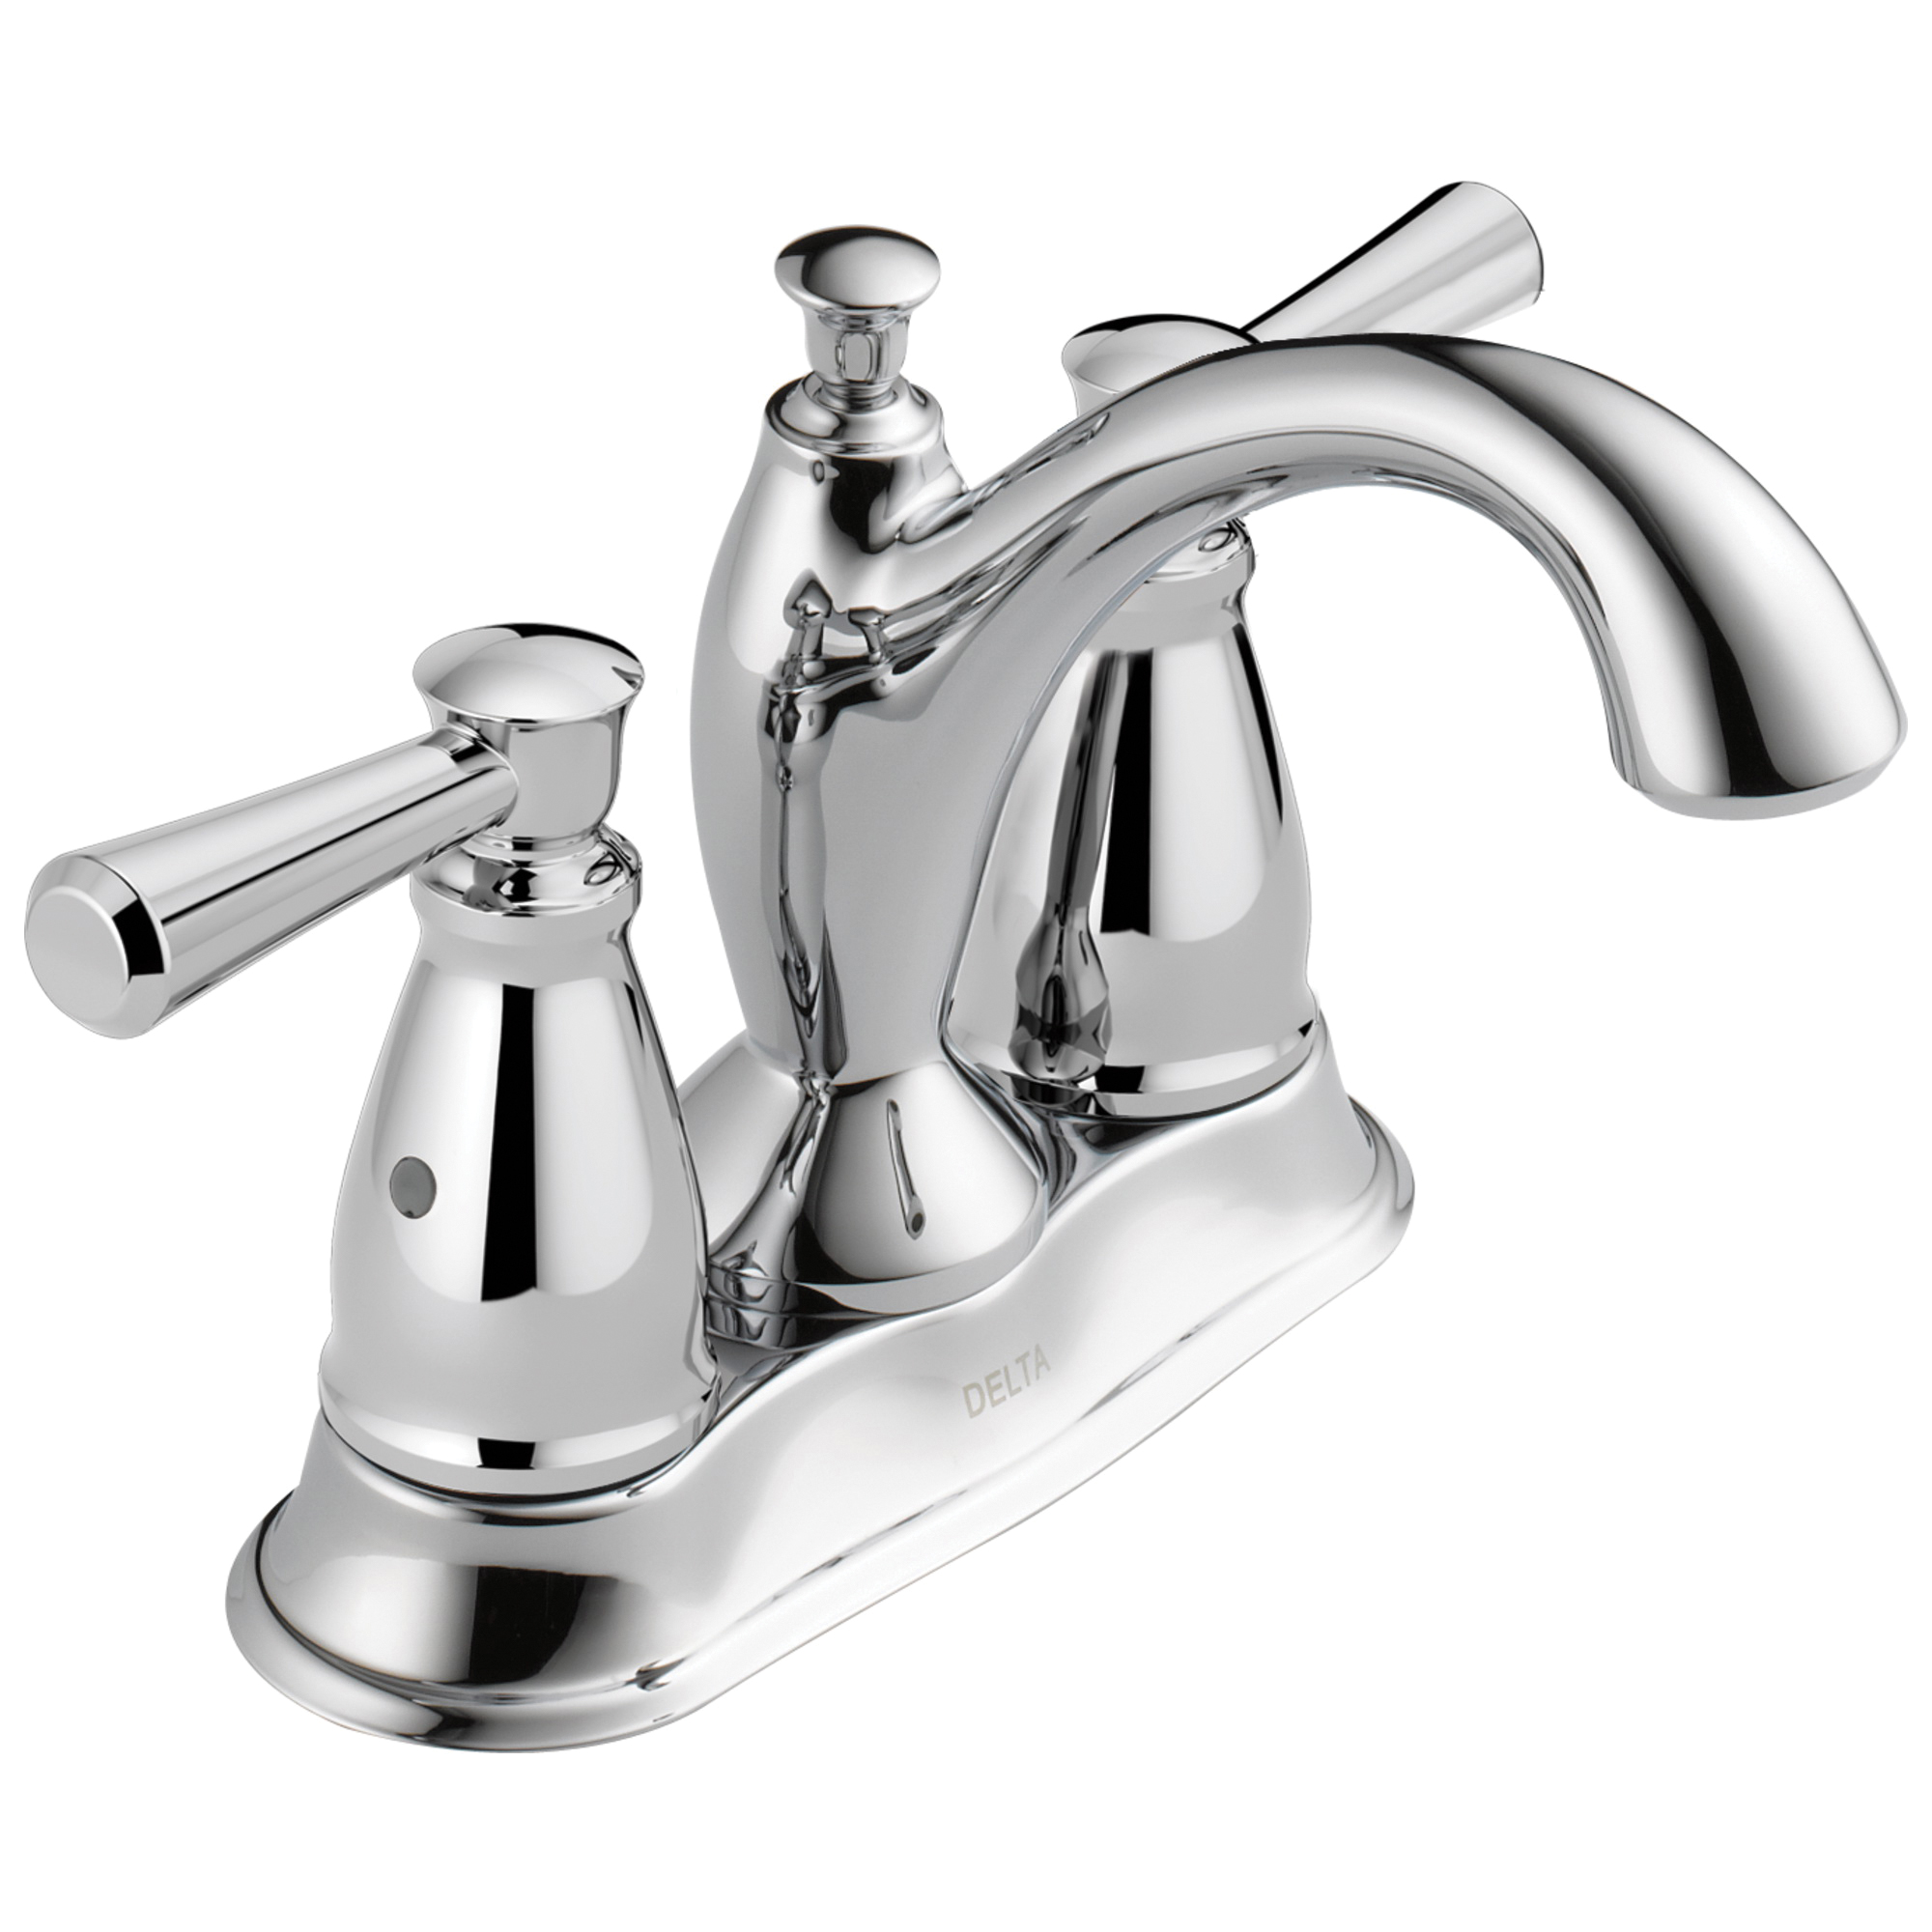 DELTA® 2593-TP-DST Tract-Pack™ Centerset Lavatory Faucet, Linden™, Chrome Plated, 2 Handles, 50/50 Pop-Up Drain, 1.2 gpm